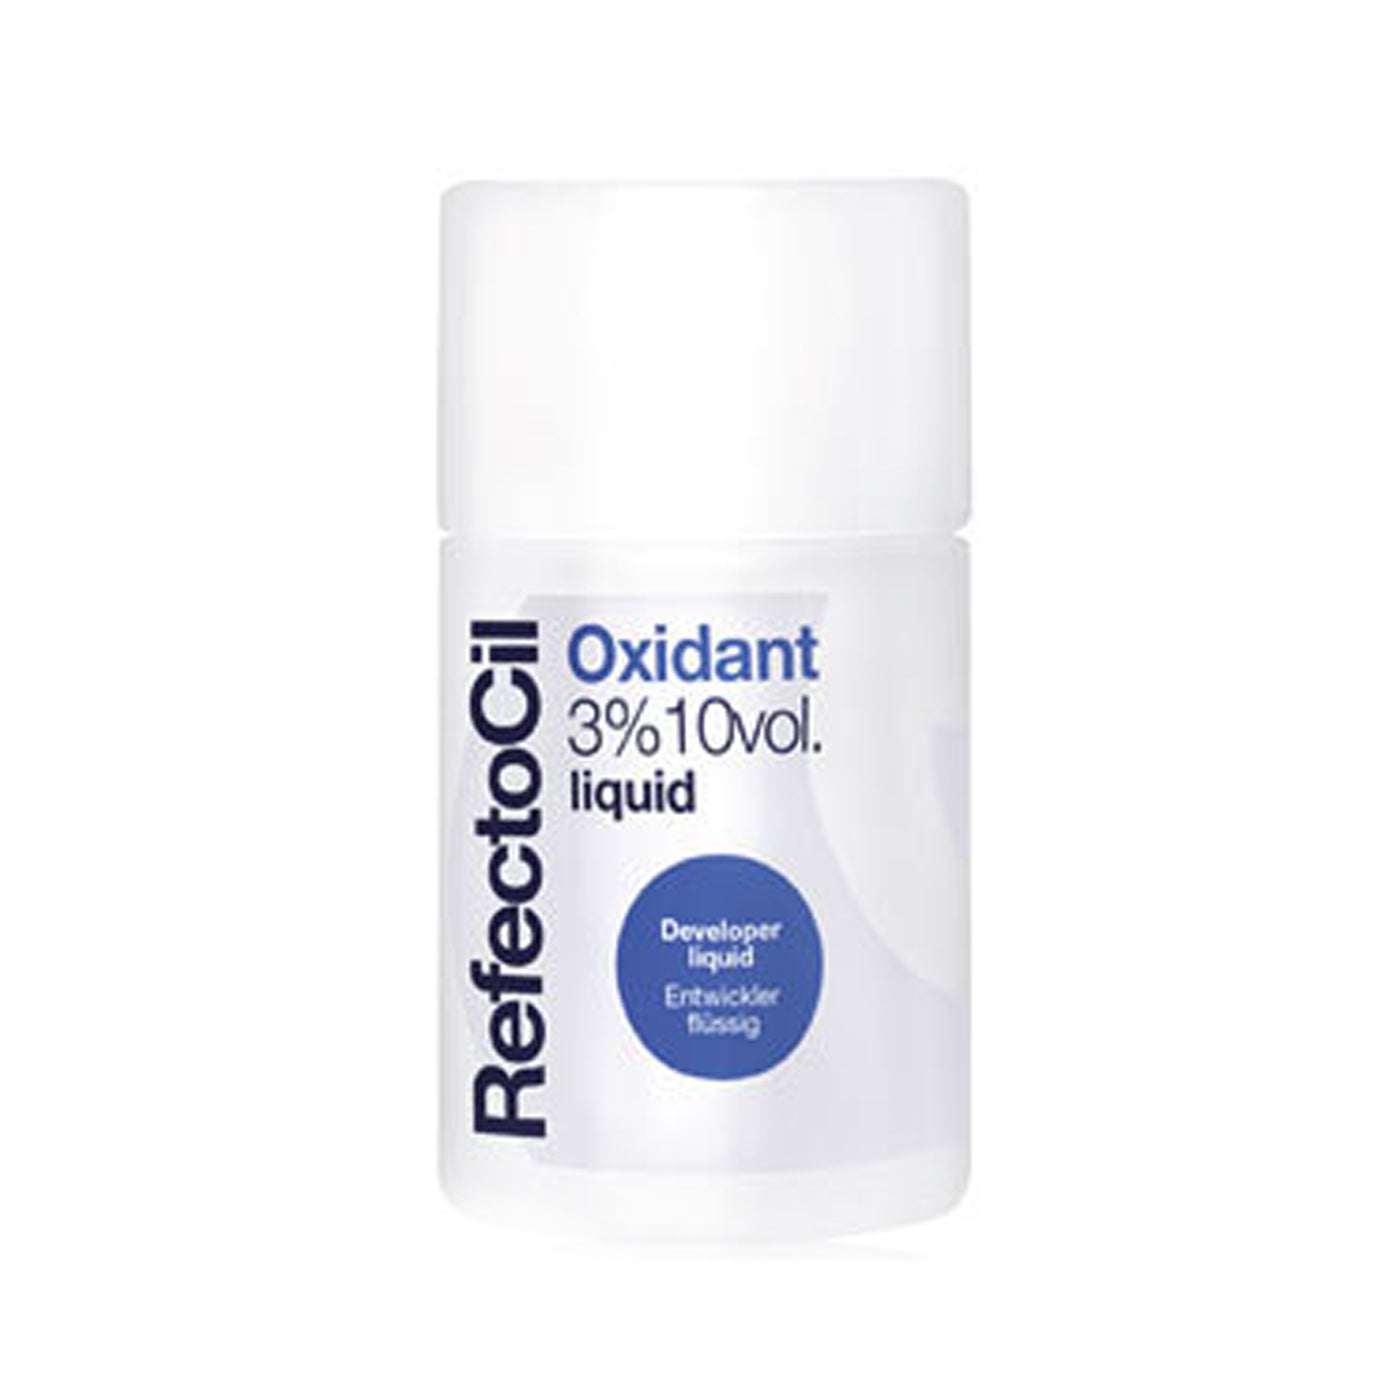 RefectoCil Liquid Oxidant 3% (10 vol) (100ml) - Ultimate Hair and Beauty